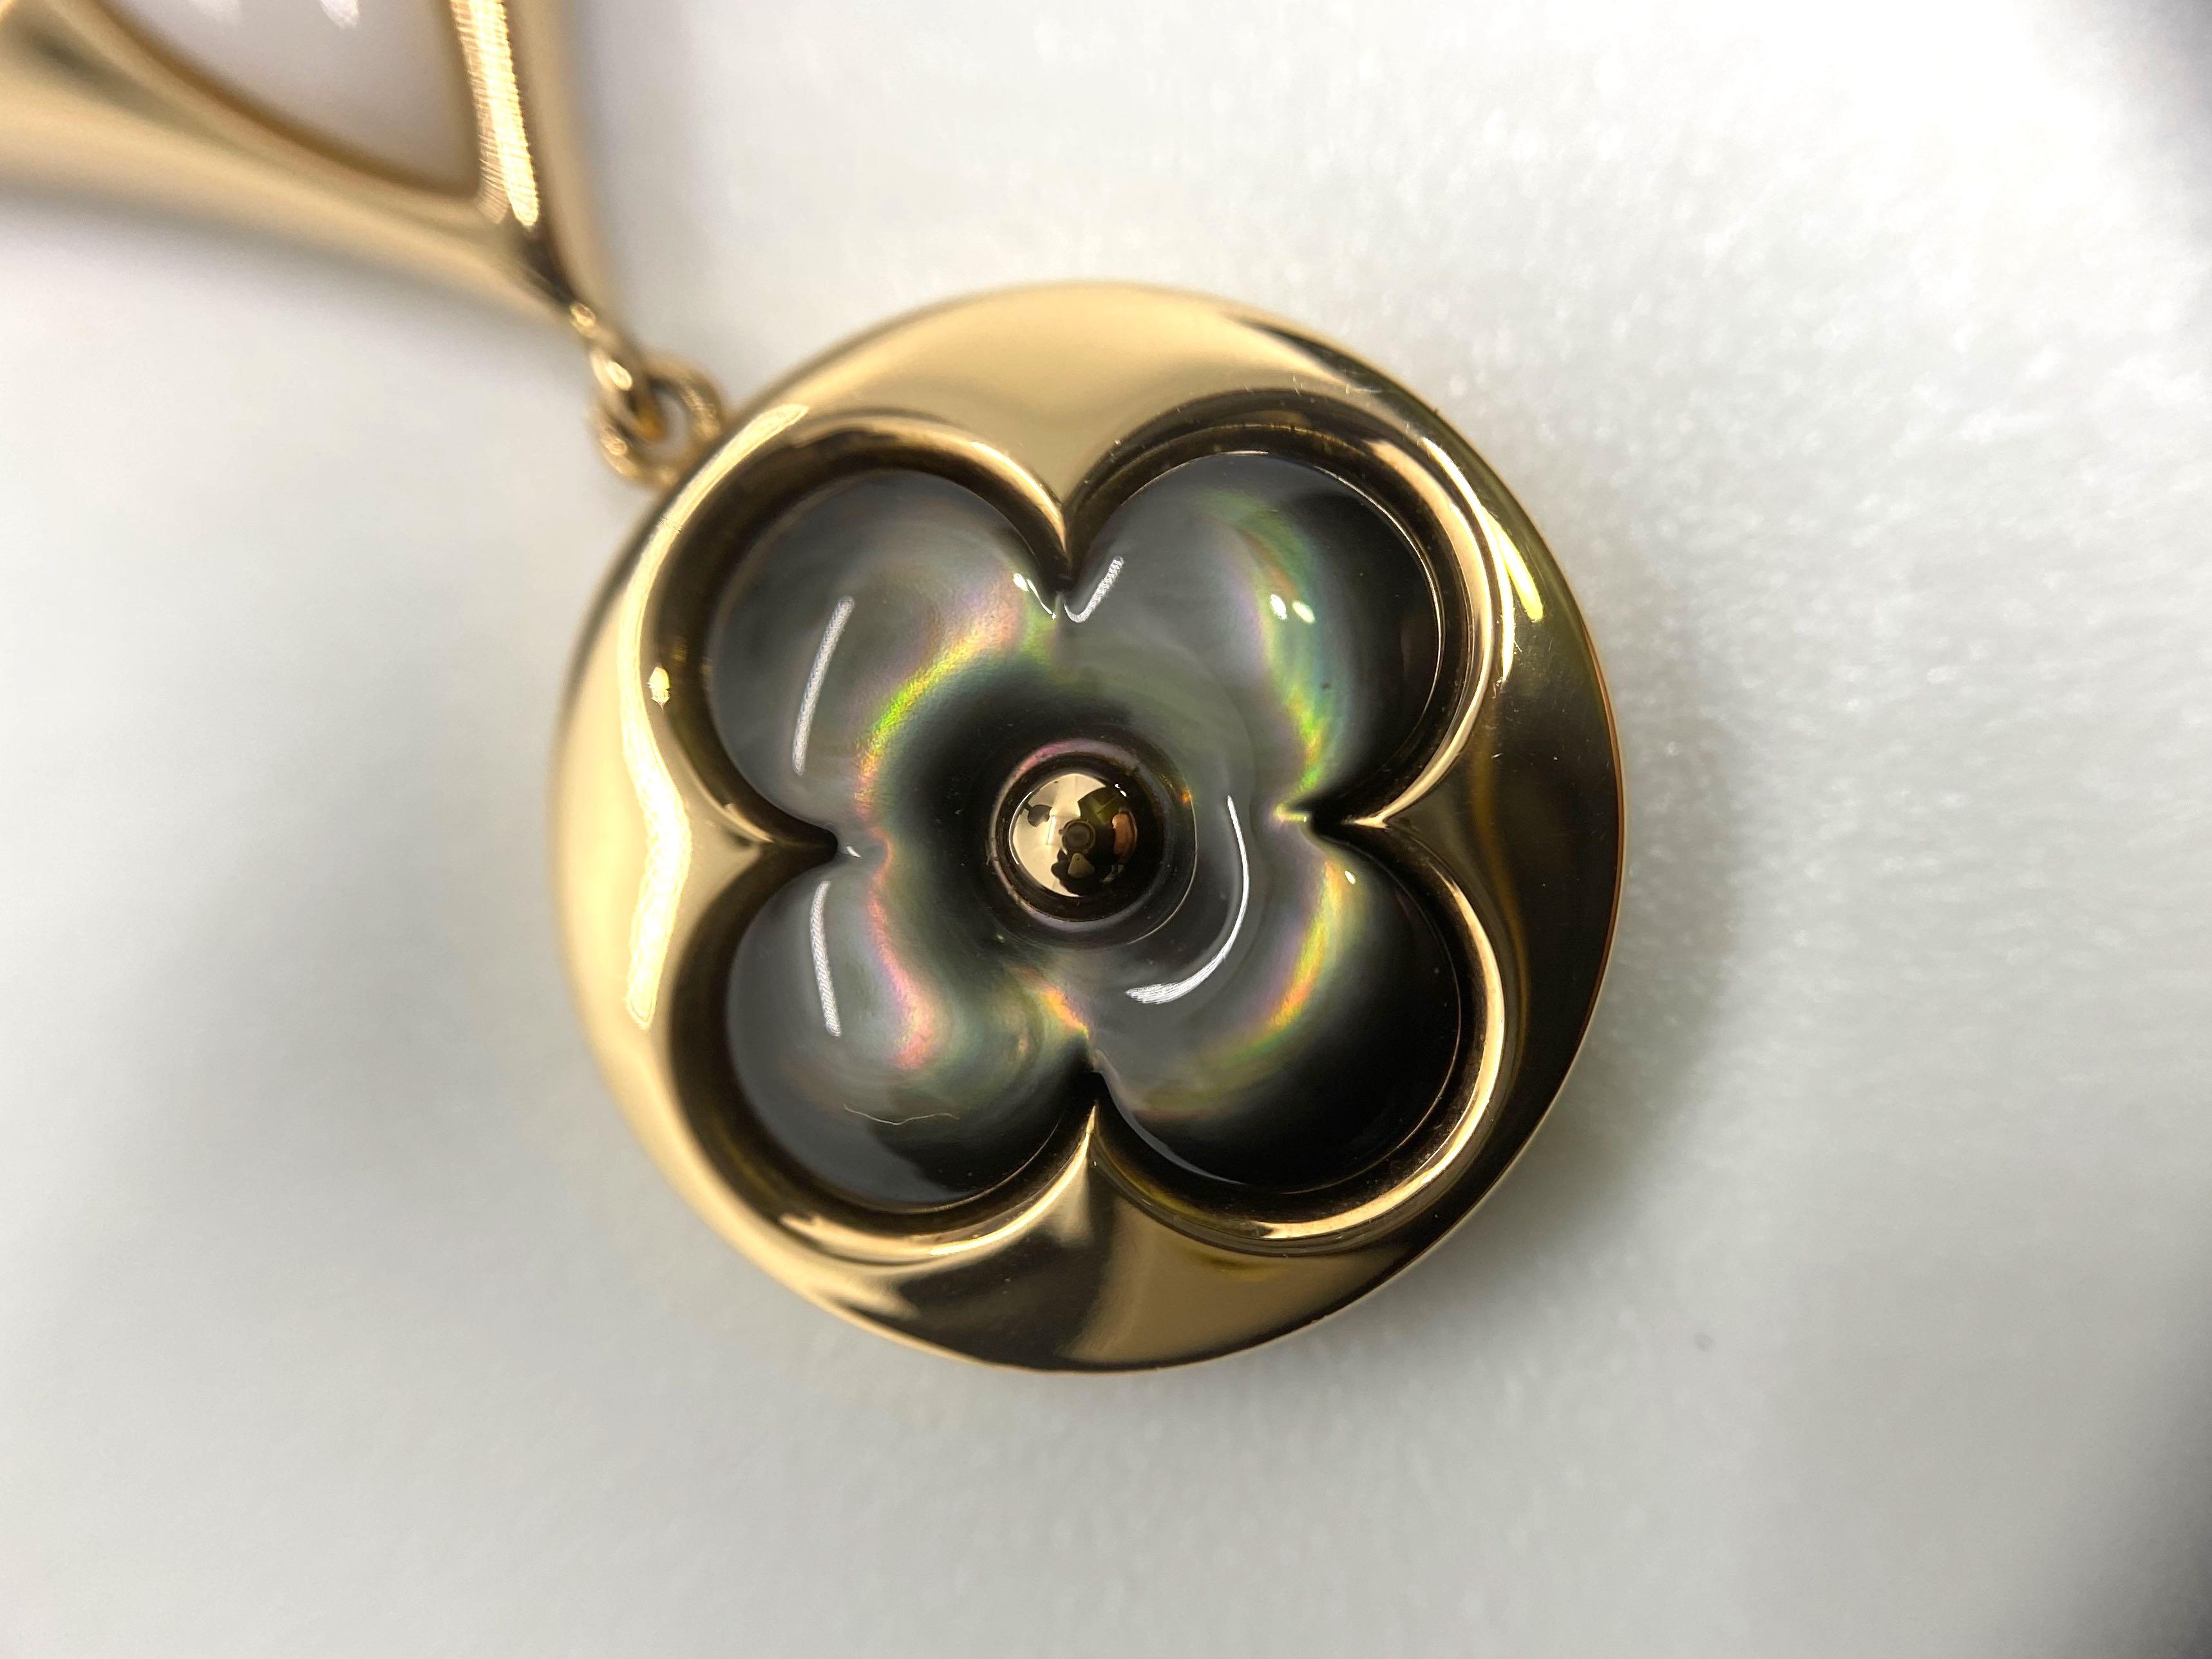 Louis Vuitton Color Blossom Lariat Necklace 18K Rose Gold with Mother of  Pearl and Diamond Rose gold 18991960